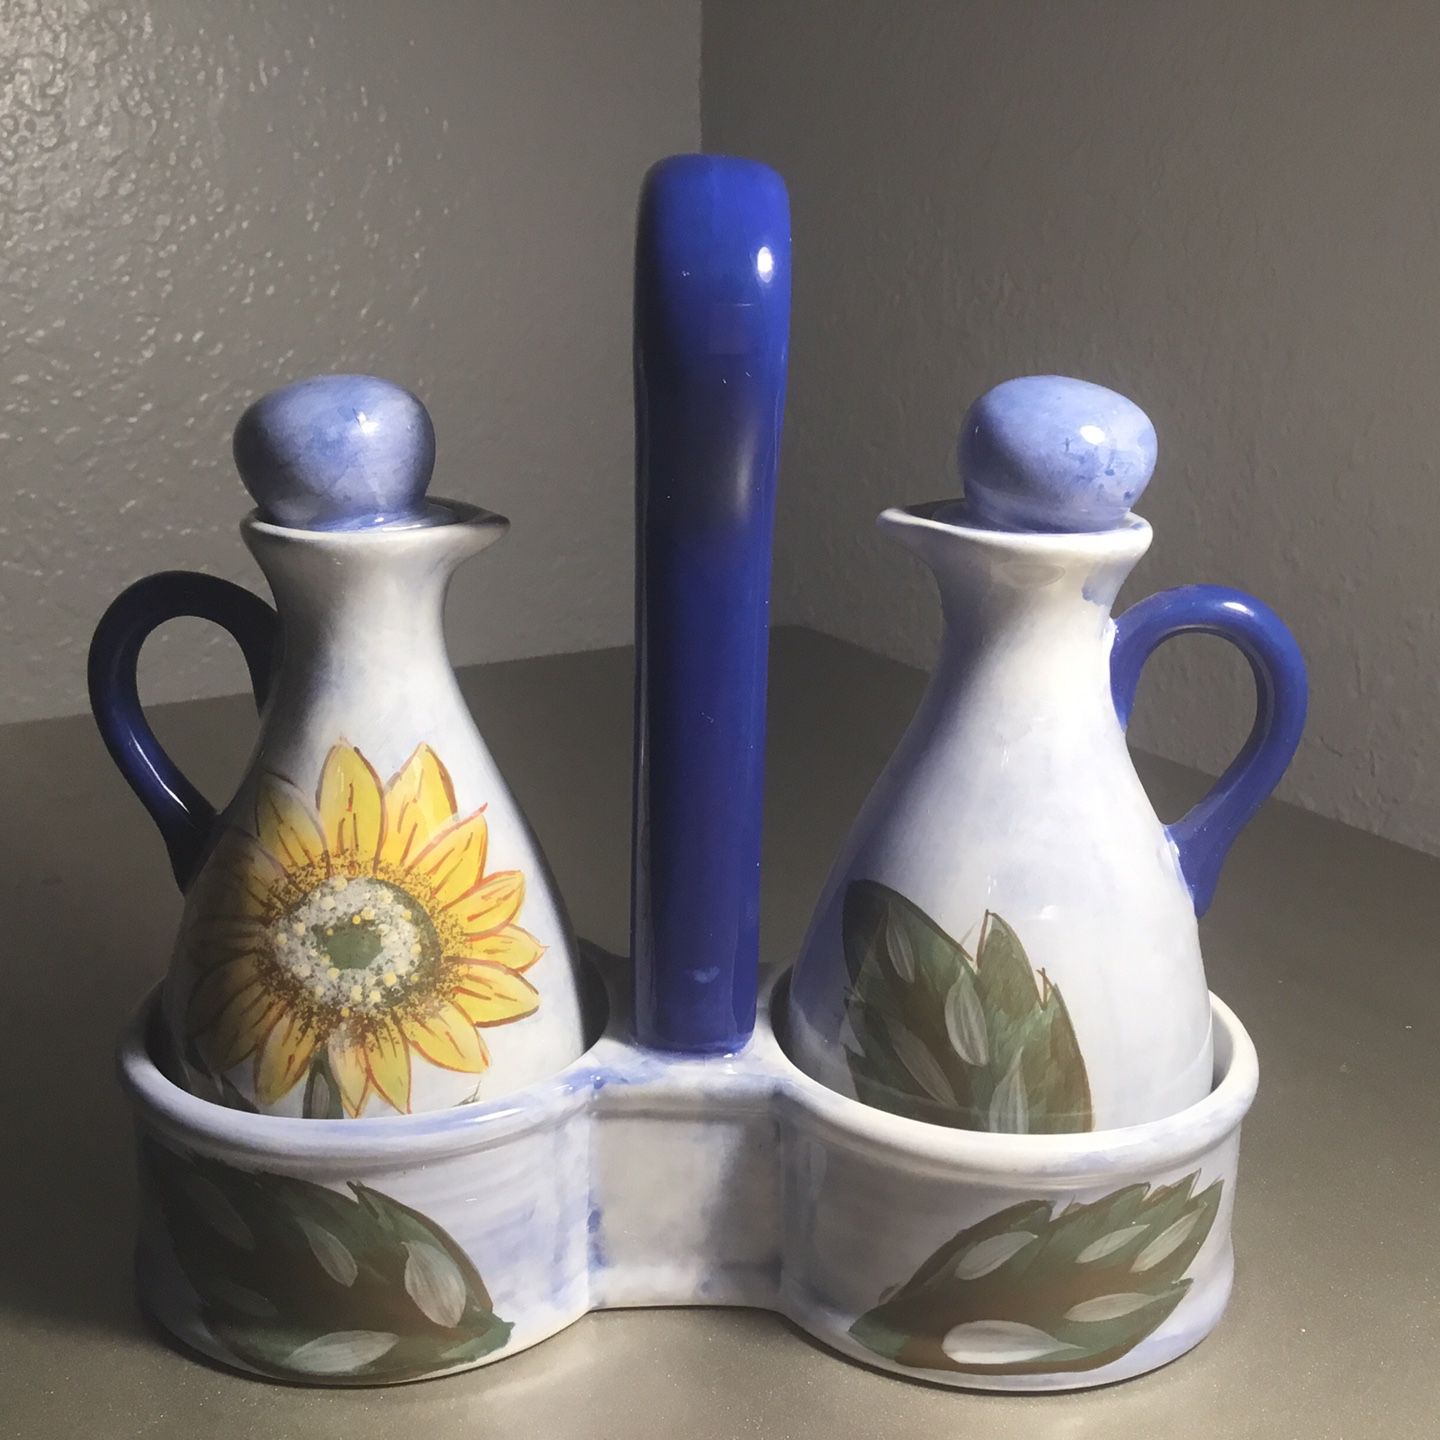 Oil And Vinegar Set Of Three (3) (Vintage 1980’s) Boxed 2 - 8oz Decanters And 1 Stand By La Dolce Vita (Dishwasher And Microwave Safe)